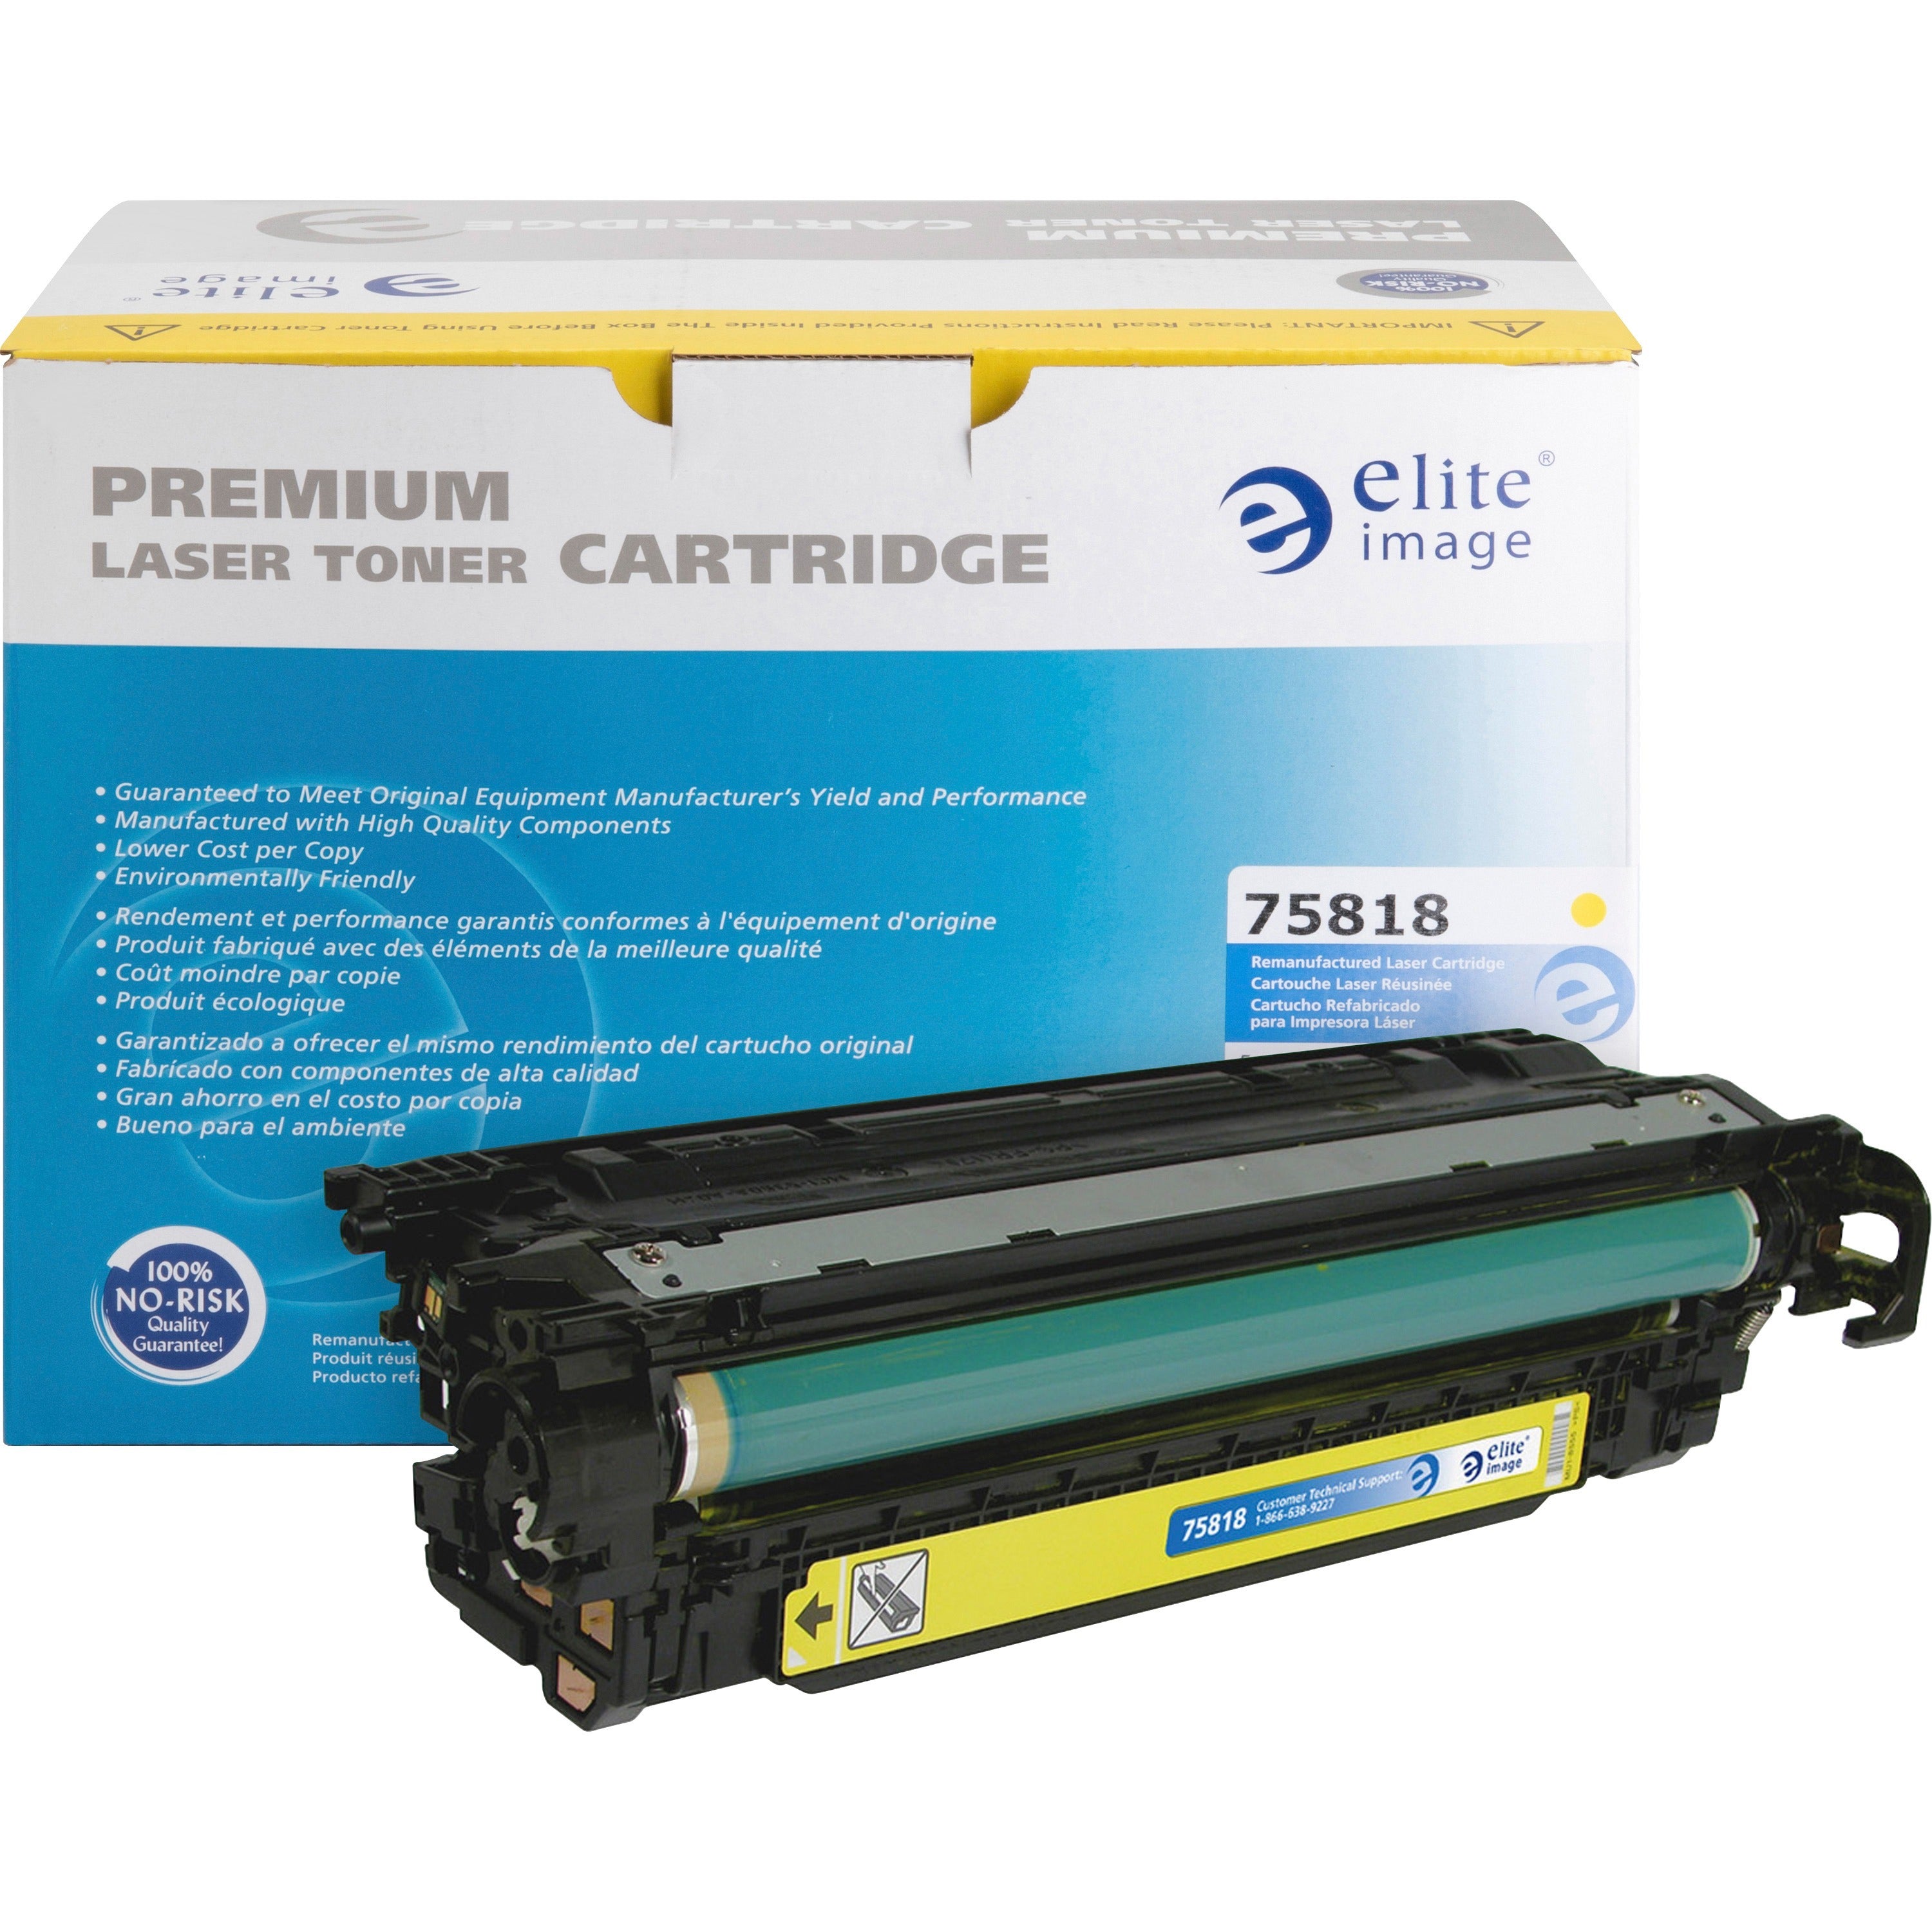 Elite Image Remanufactured Laser Toner Cartridge - Alternative for HP 507A (CE402A) - Yellow - 1 Each - 6000 Pages - 1